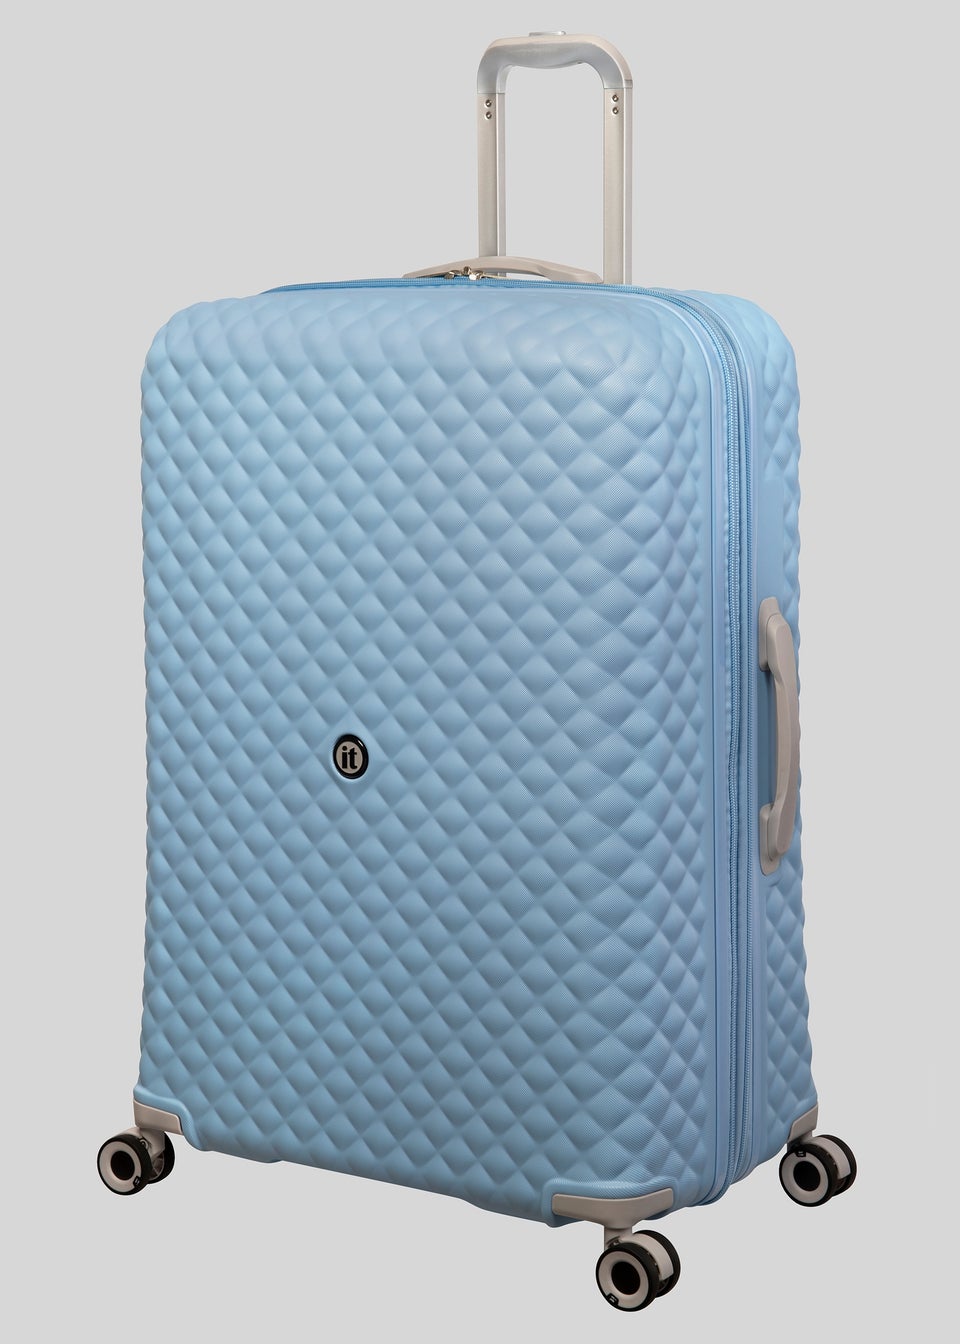 IT Luggage Blue Quilted Suitcase